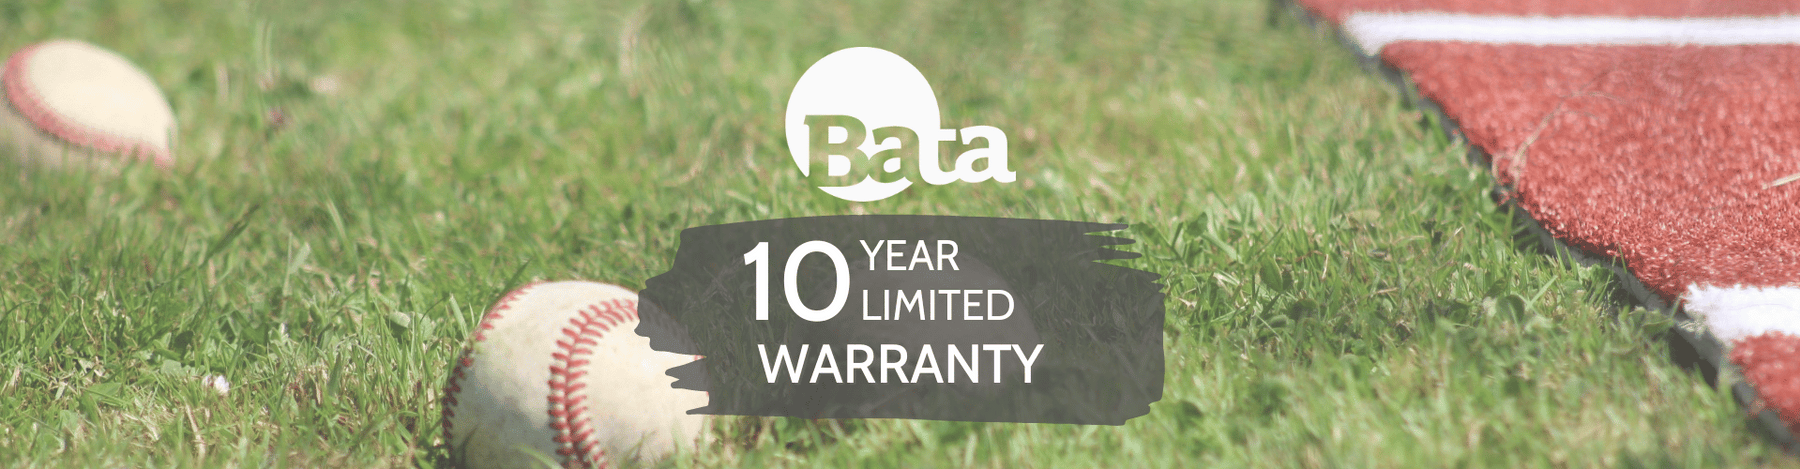 BATA Pitching Machine's Unparalleled 10-Year Warranty: Setting a New Standard in the Industry